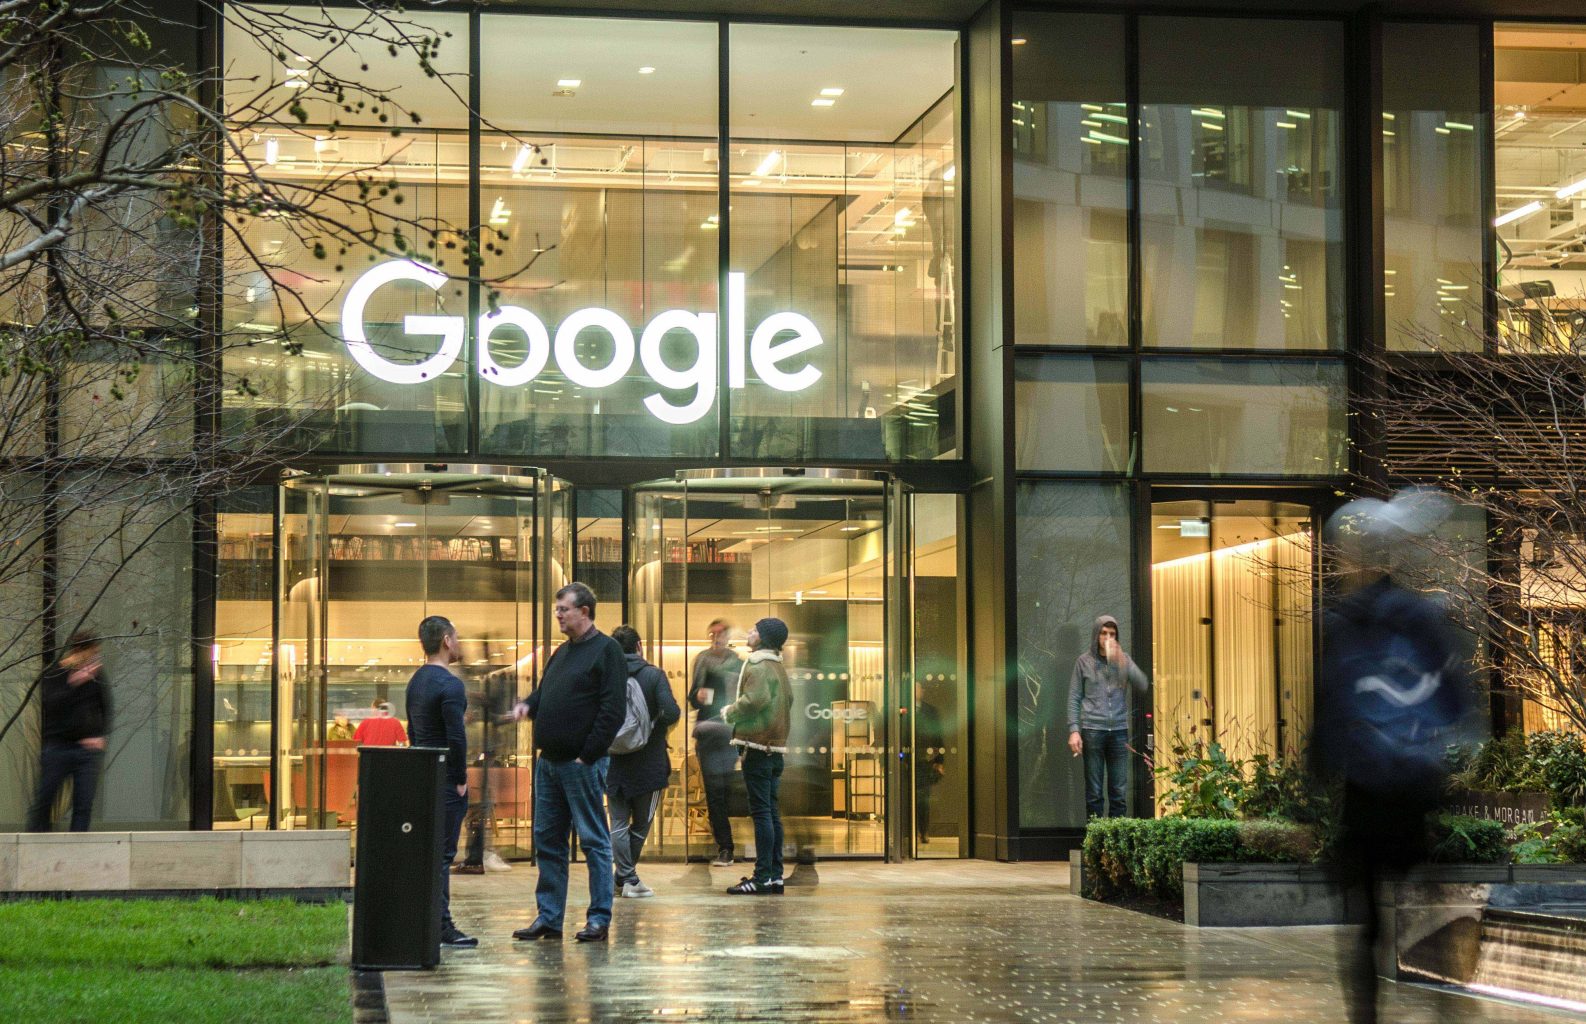 Google Earnings Analysis Q4 2019 - Impact and Implications for Marketers